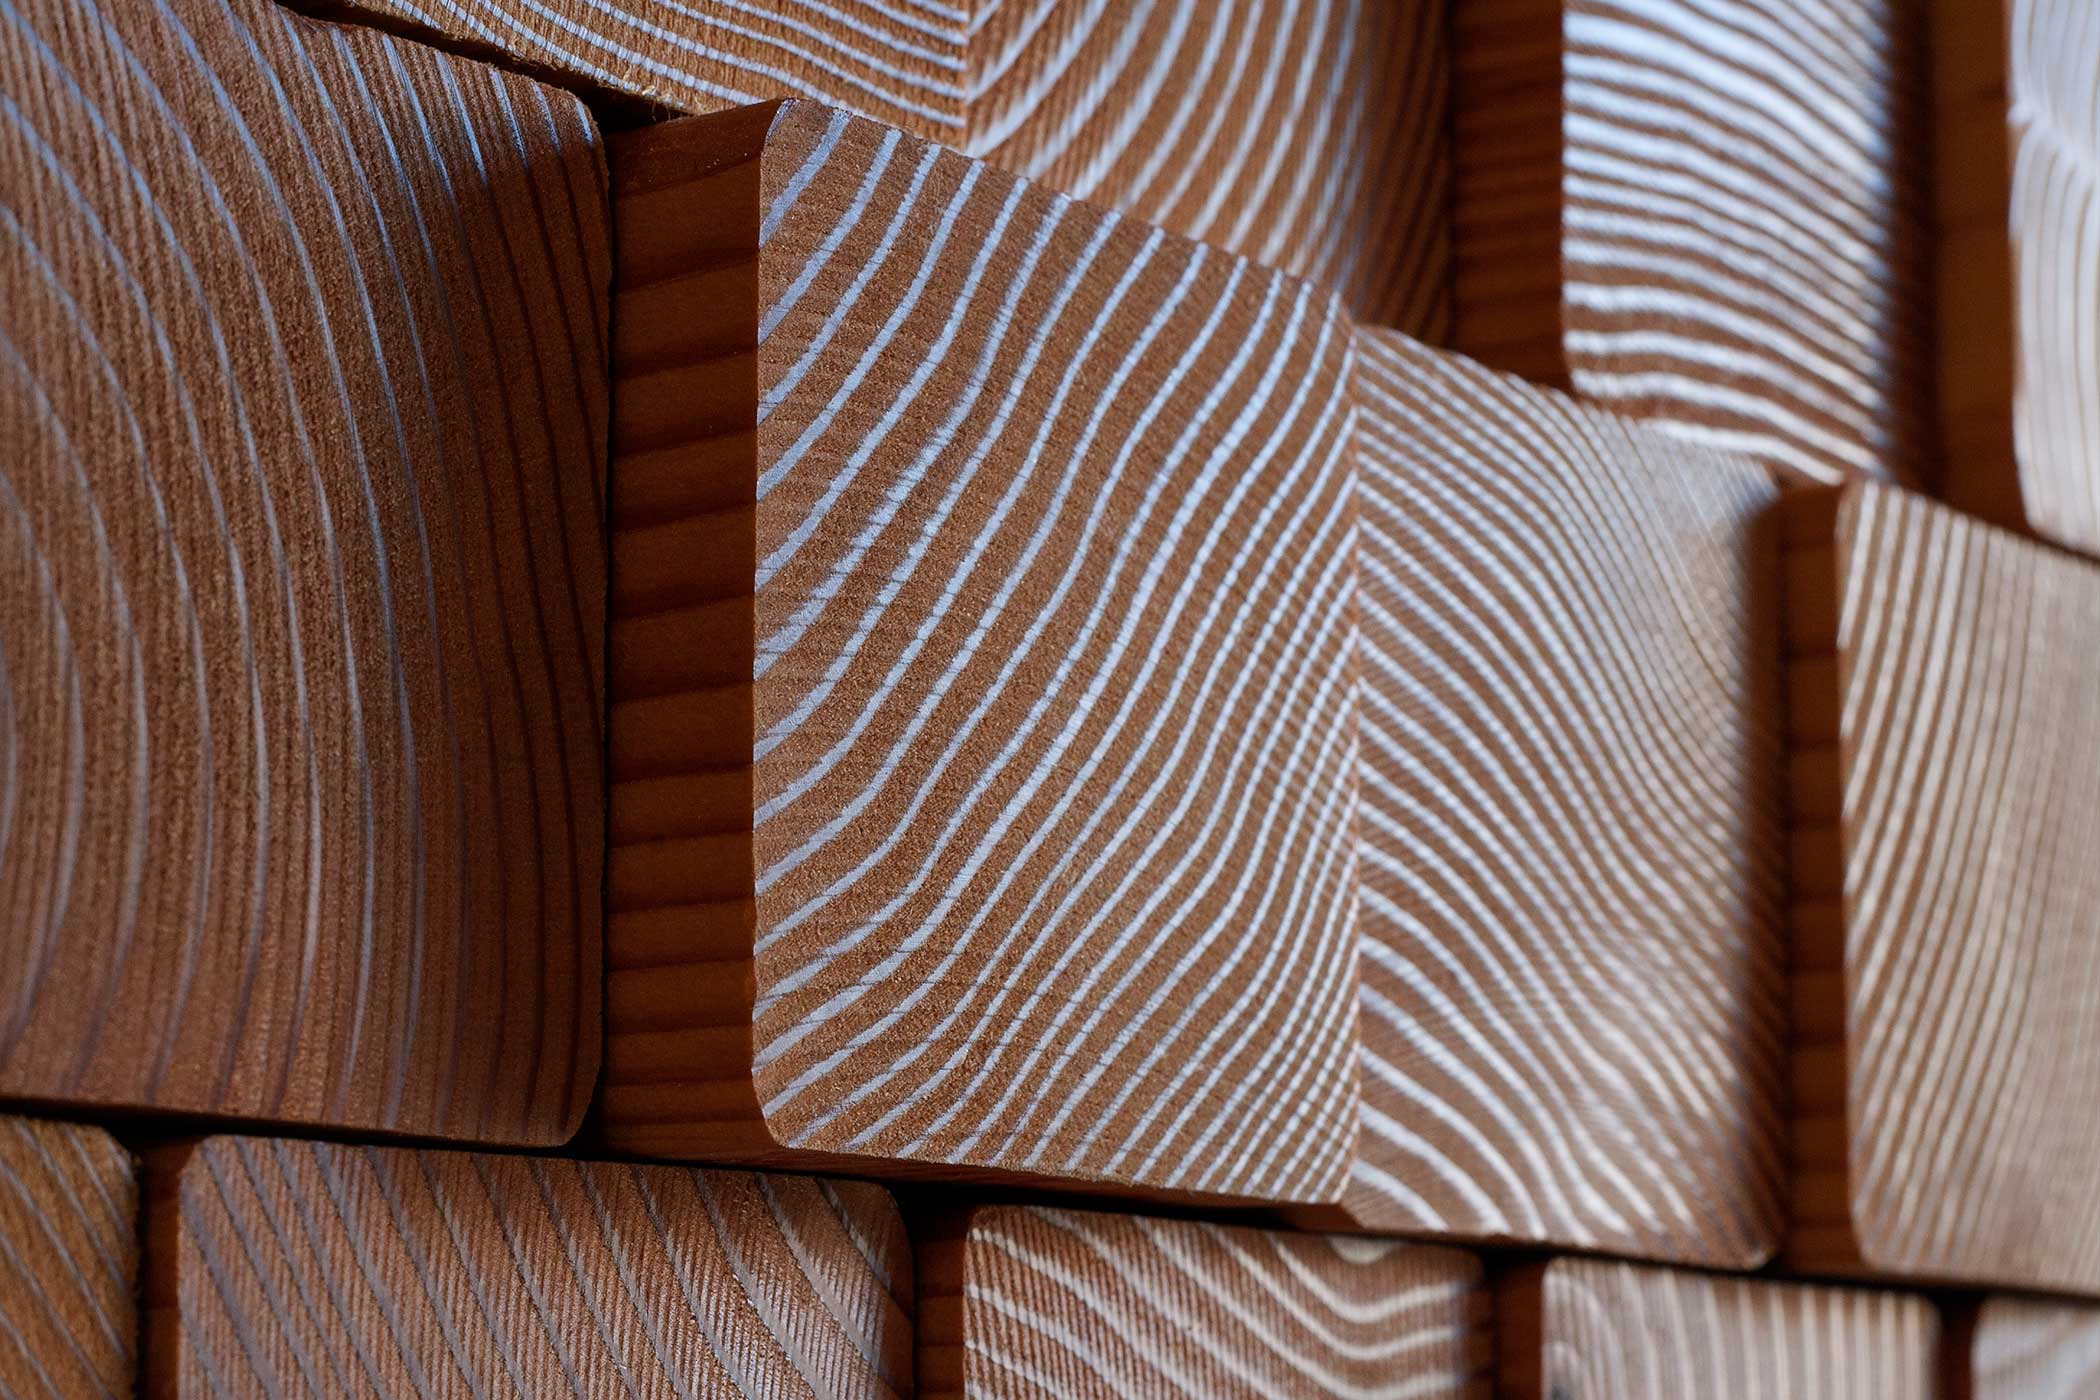 'Noodle Shop - Wall Detail' by Christopher Campbell Architecture